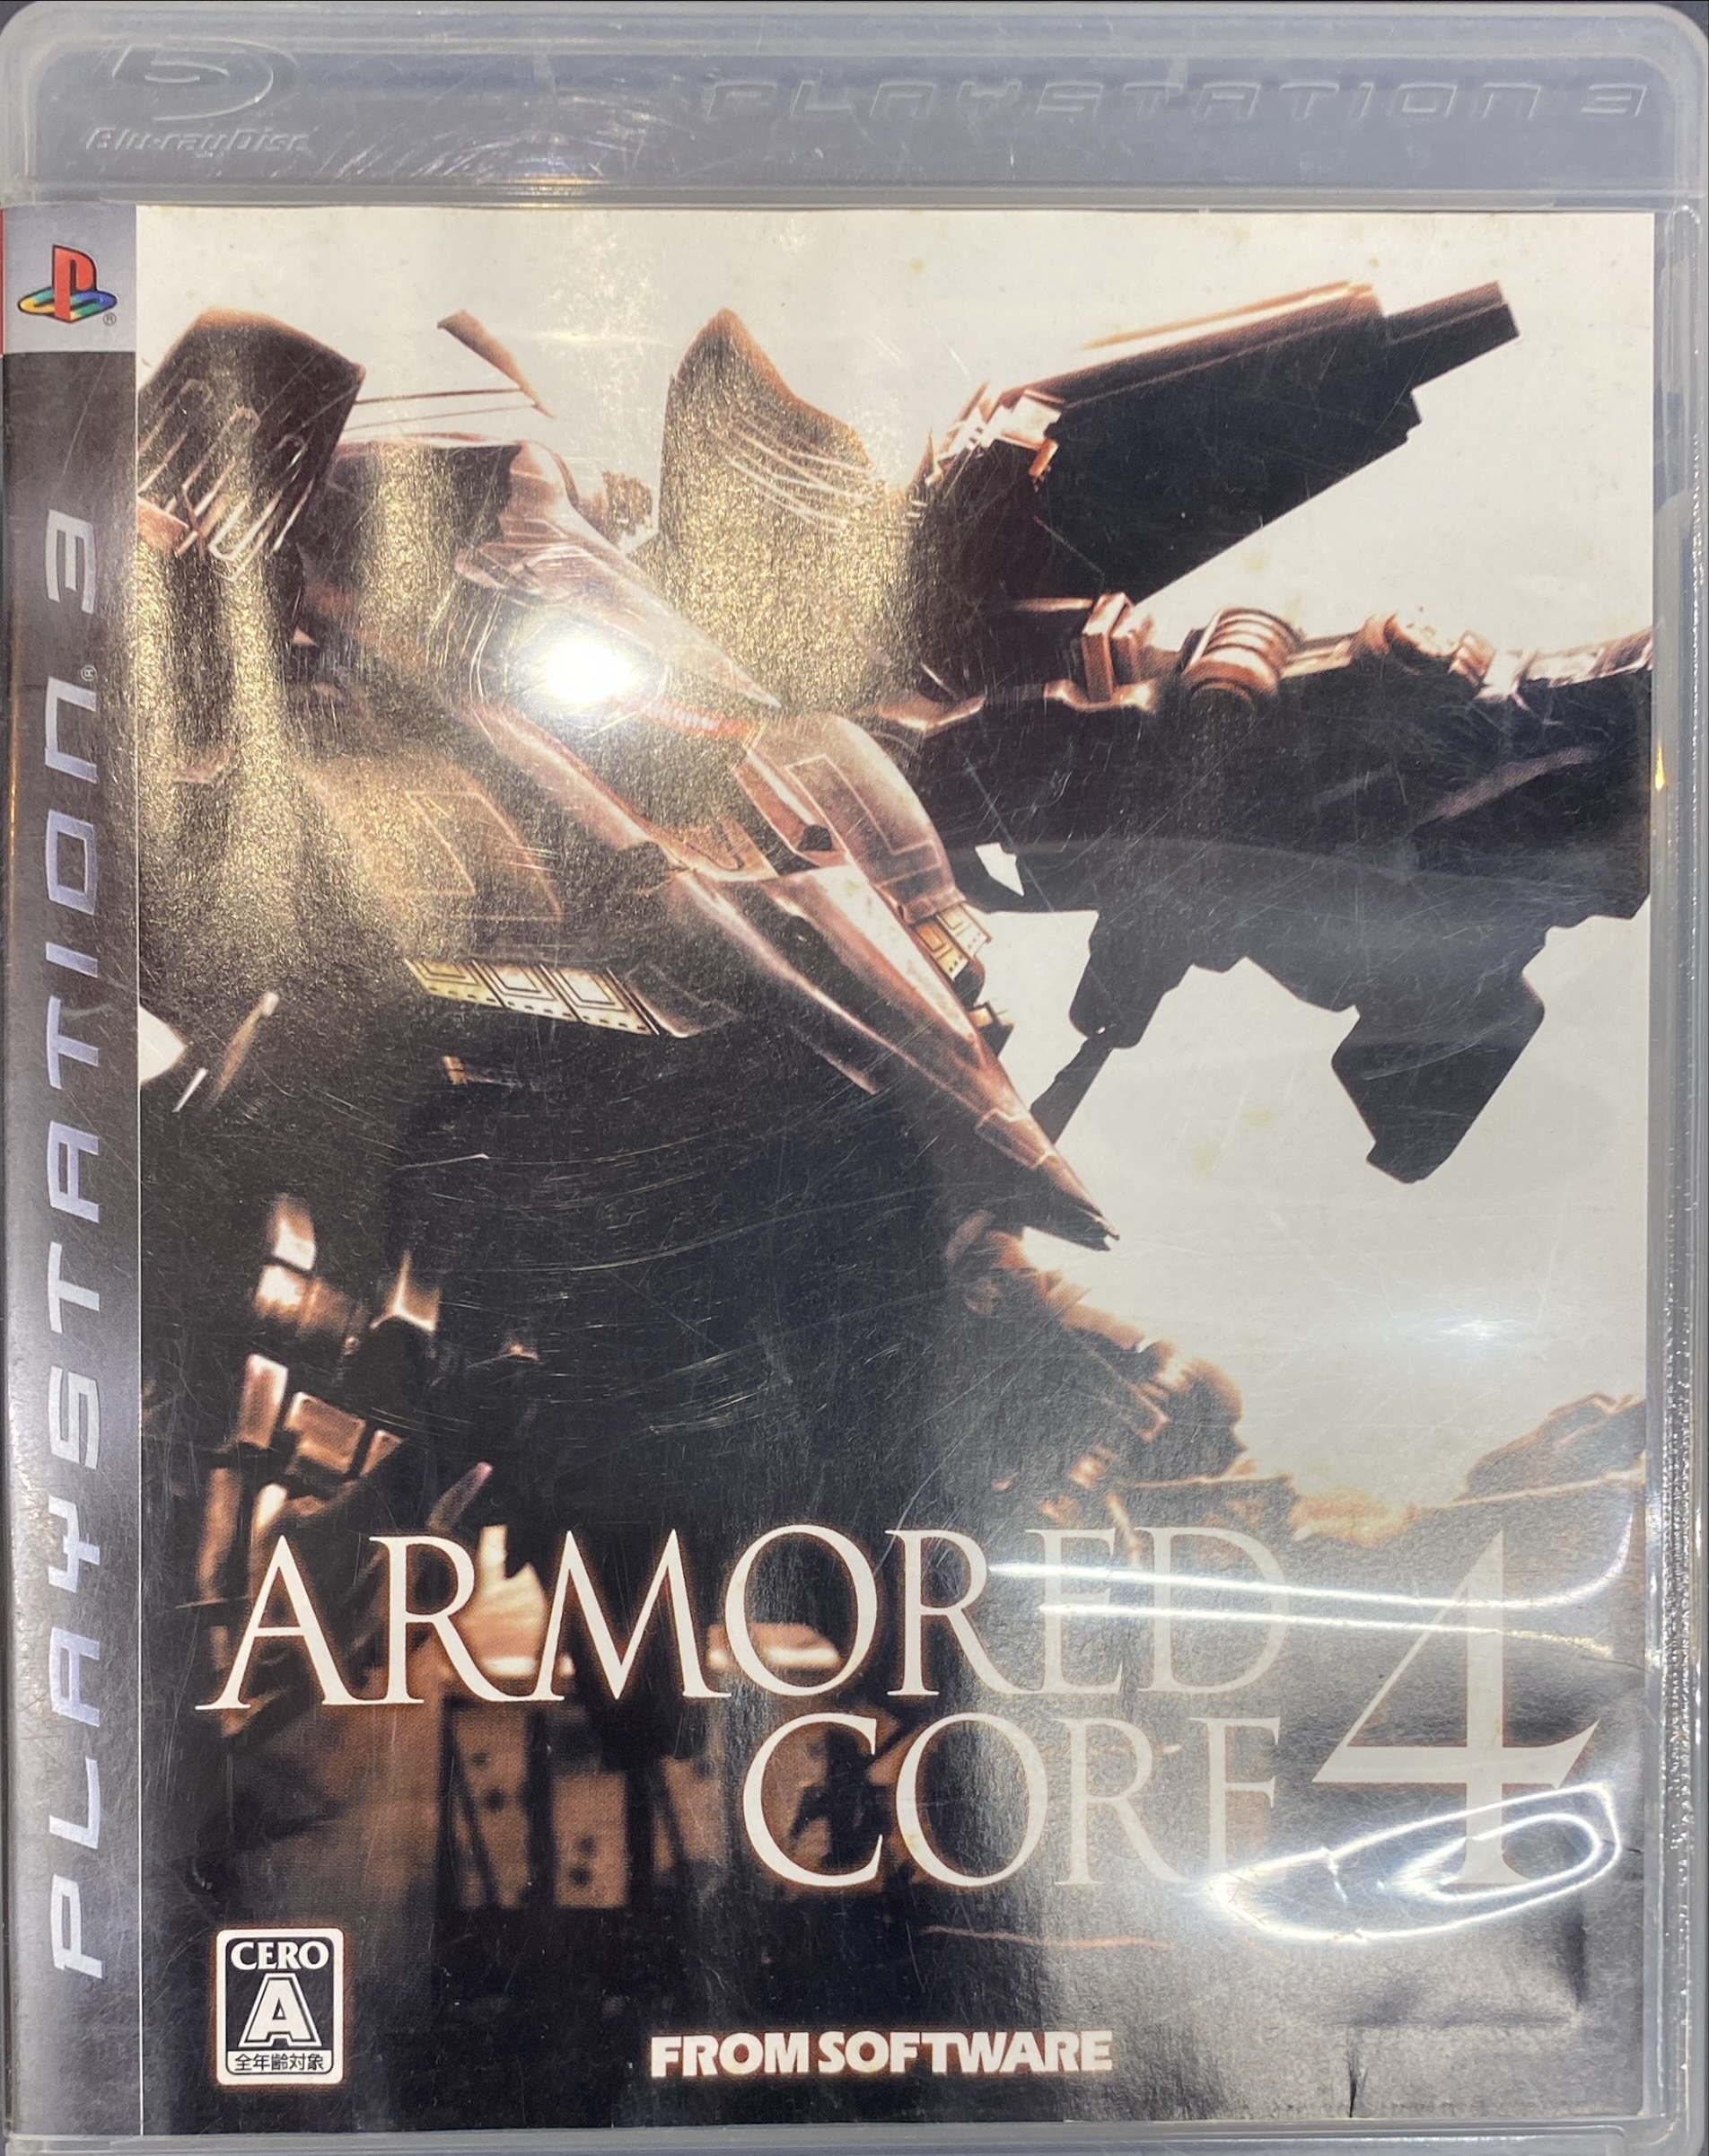 PS3ソフトARMORED CORE4